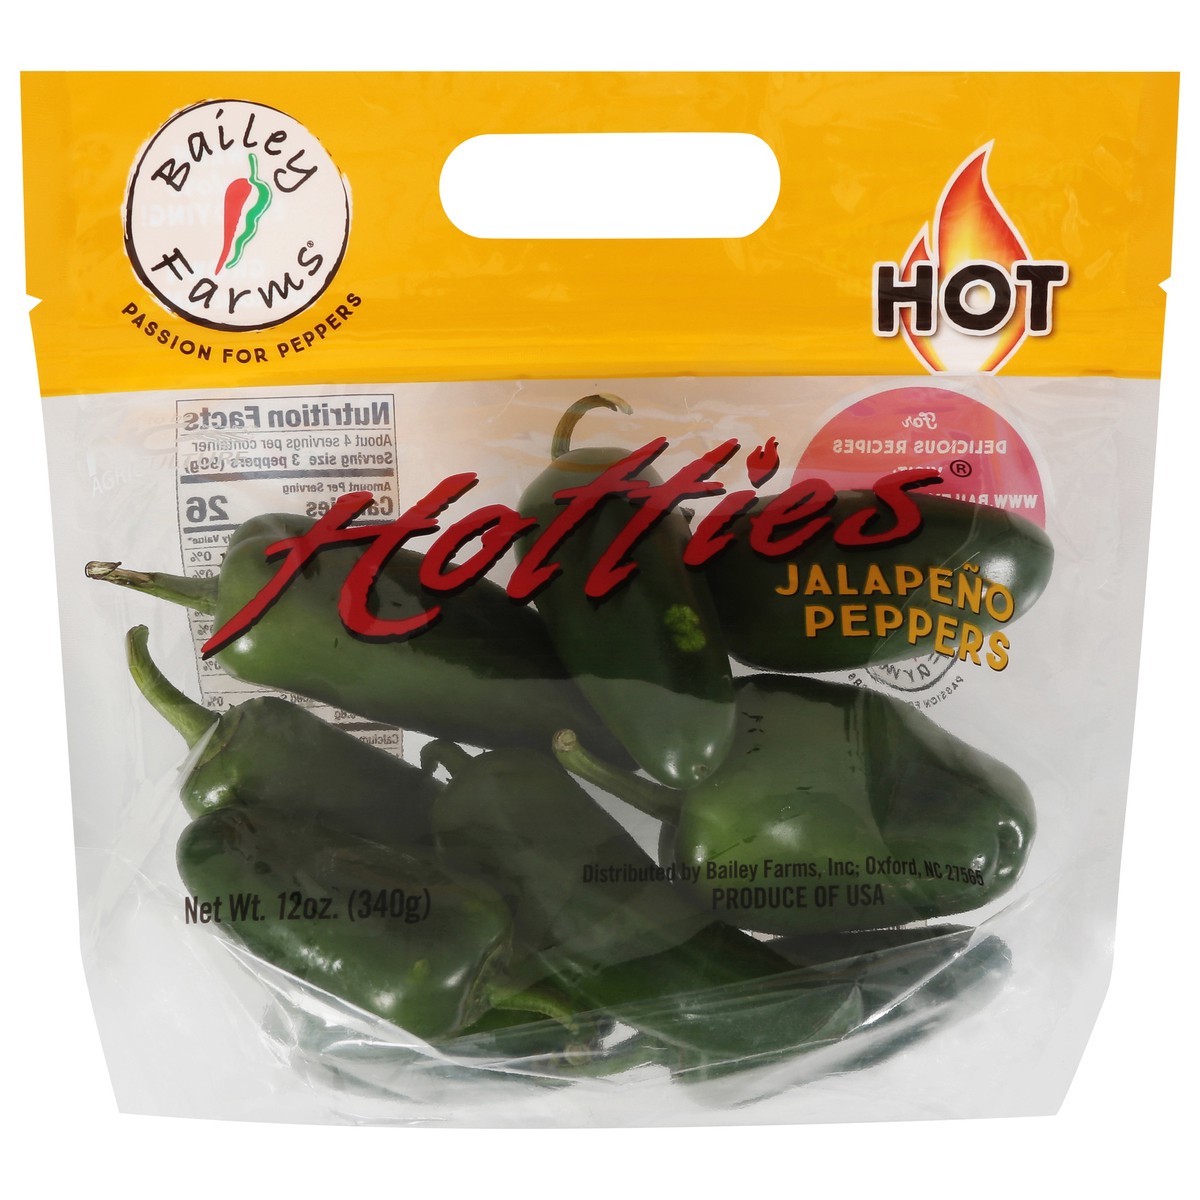 slide 1 of 9, Bailey Farms Hotties Hot Jalapeno Peppers 12 oz, 12 oz